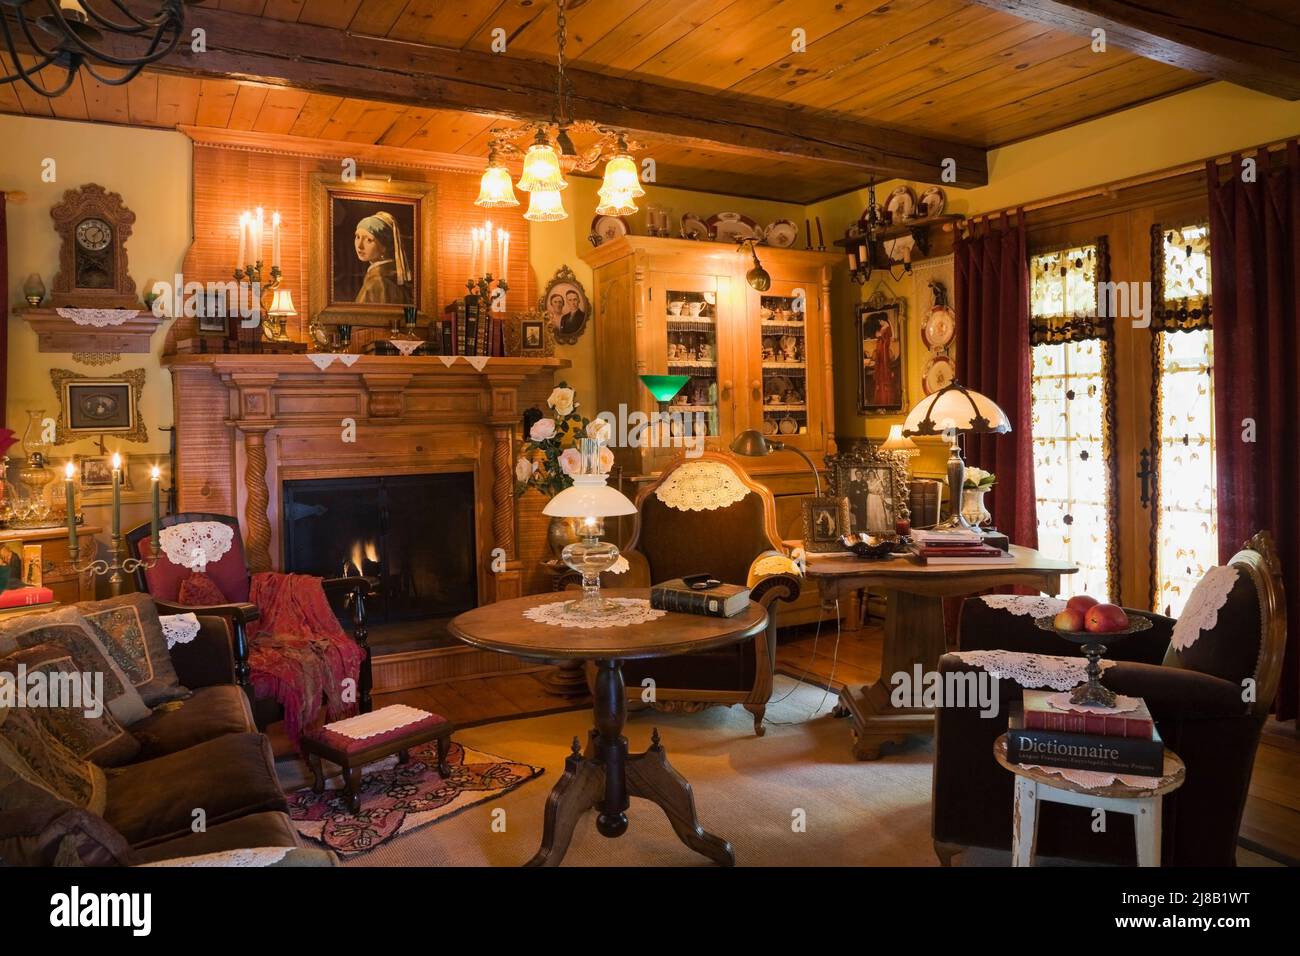 Antique armchairs and furnishings in lavishly decorated living room inside old reconstructed 1800s Canadiana cottage style log home. Stock Photo